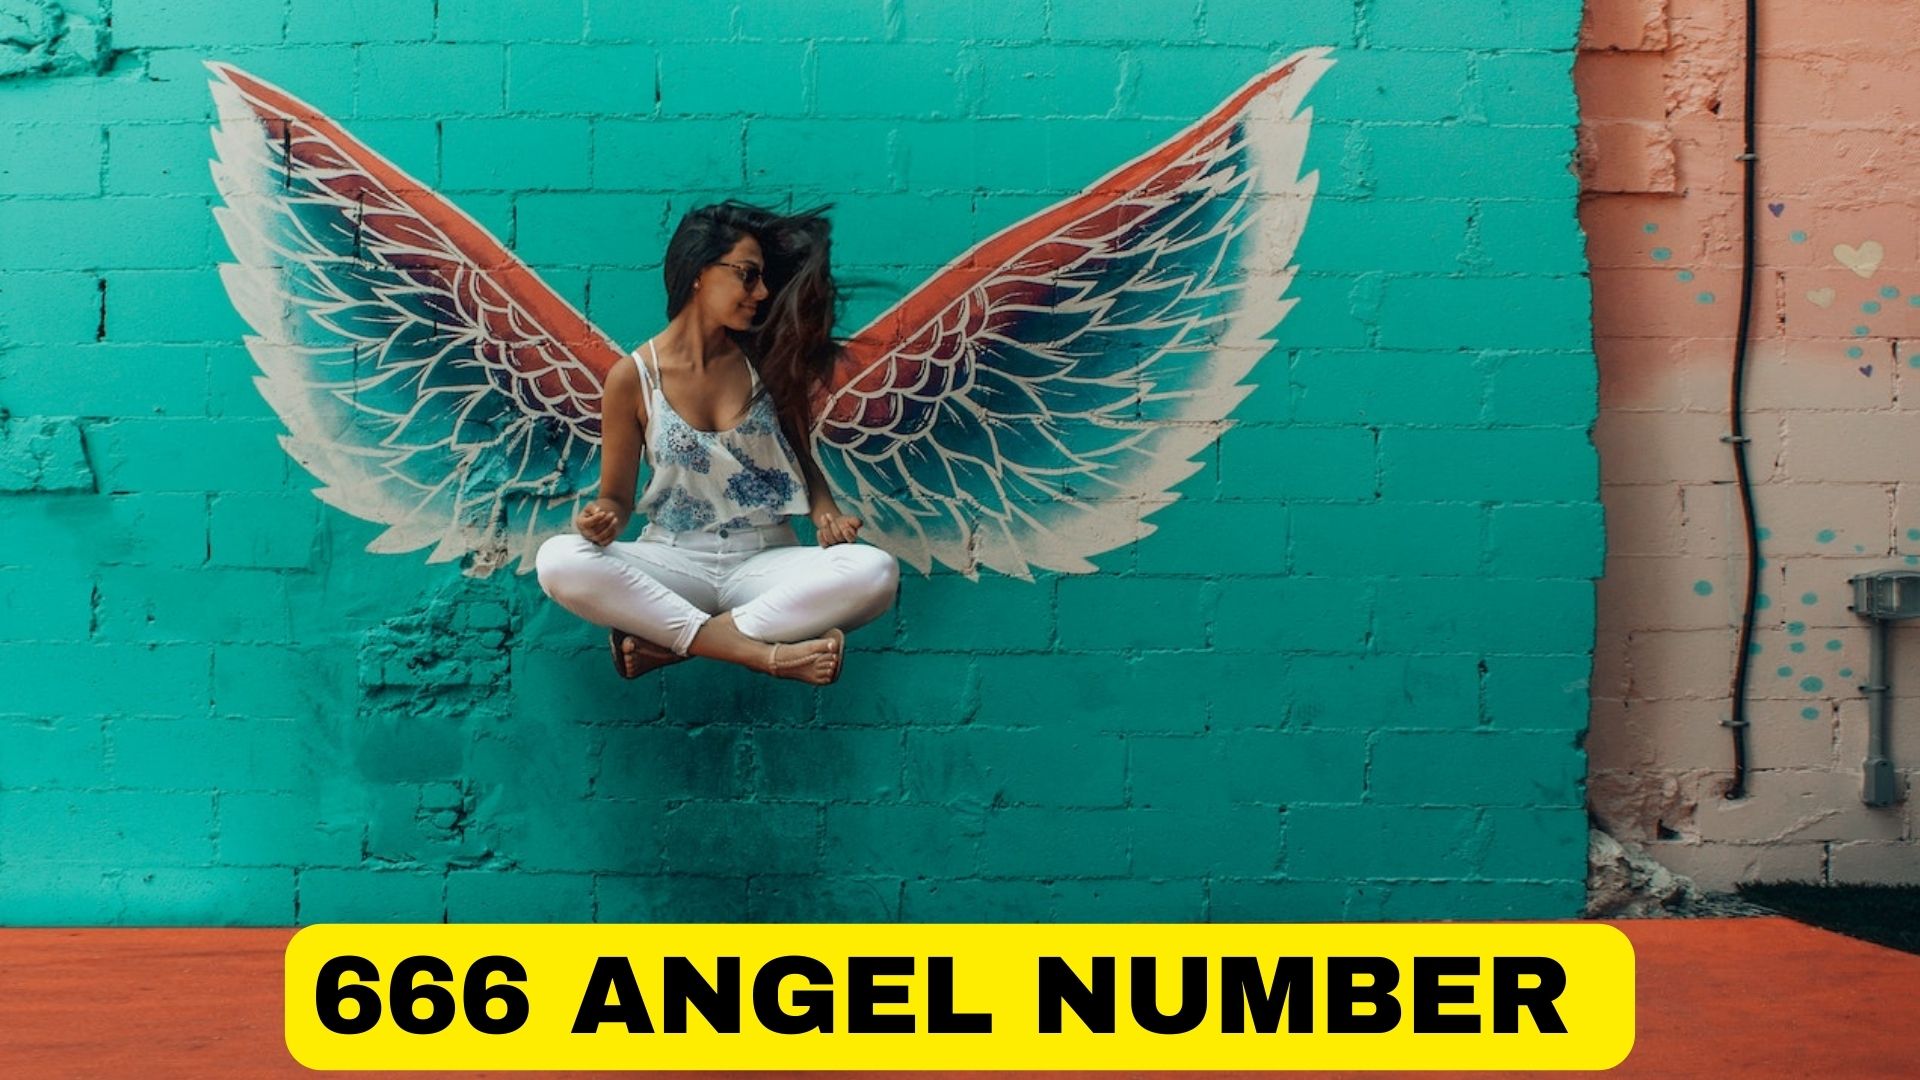 666 Angel Number - A Number Of Transformation